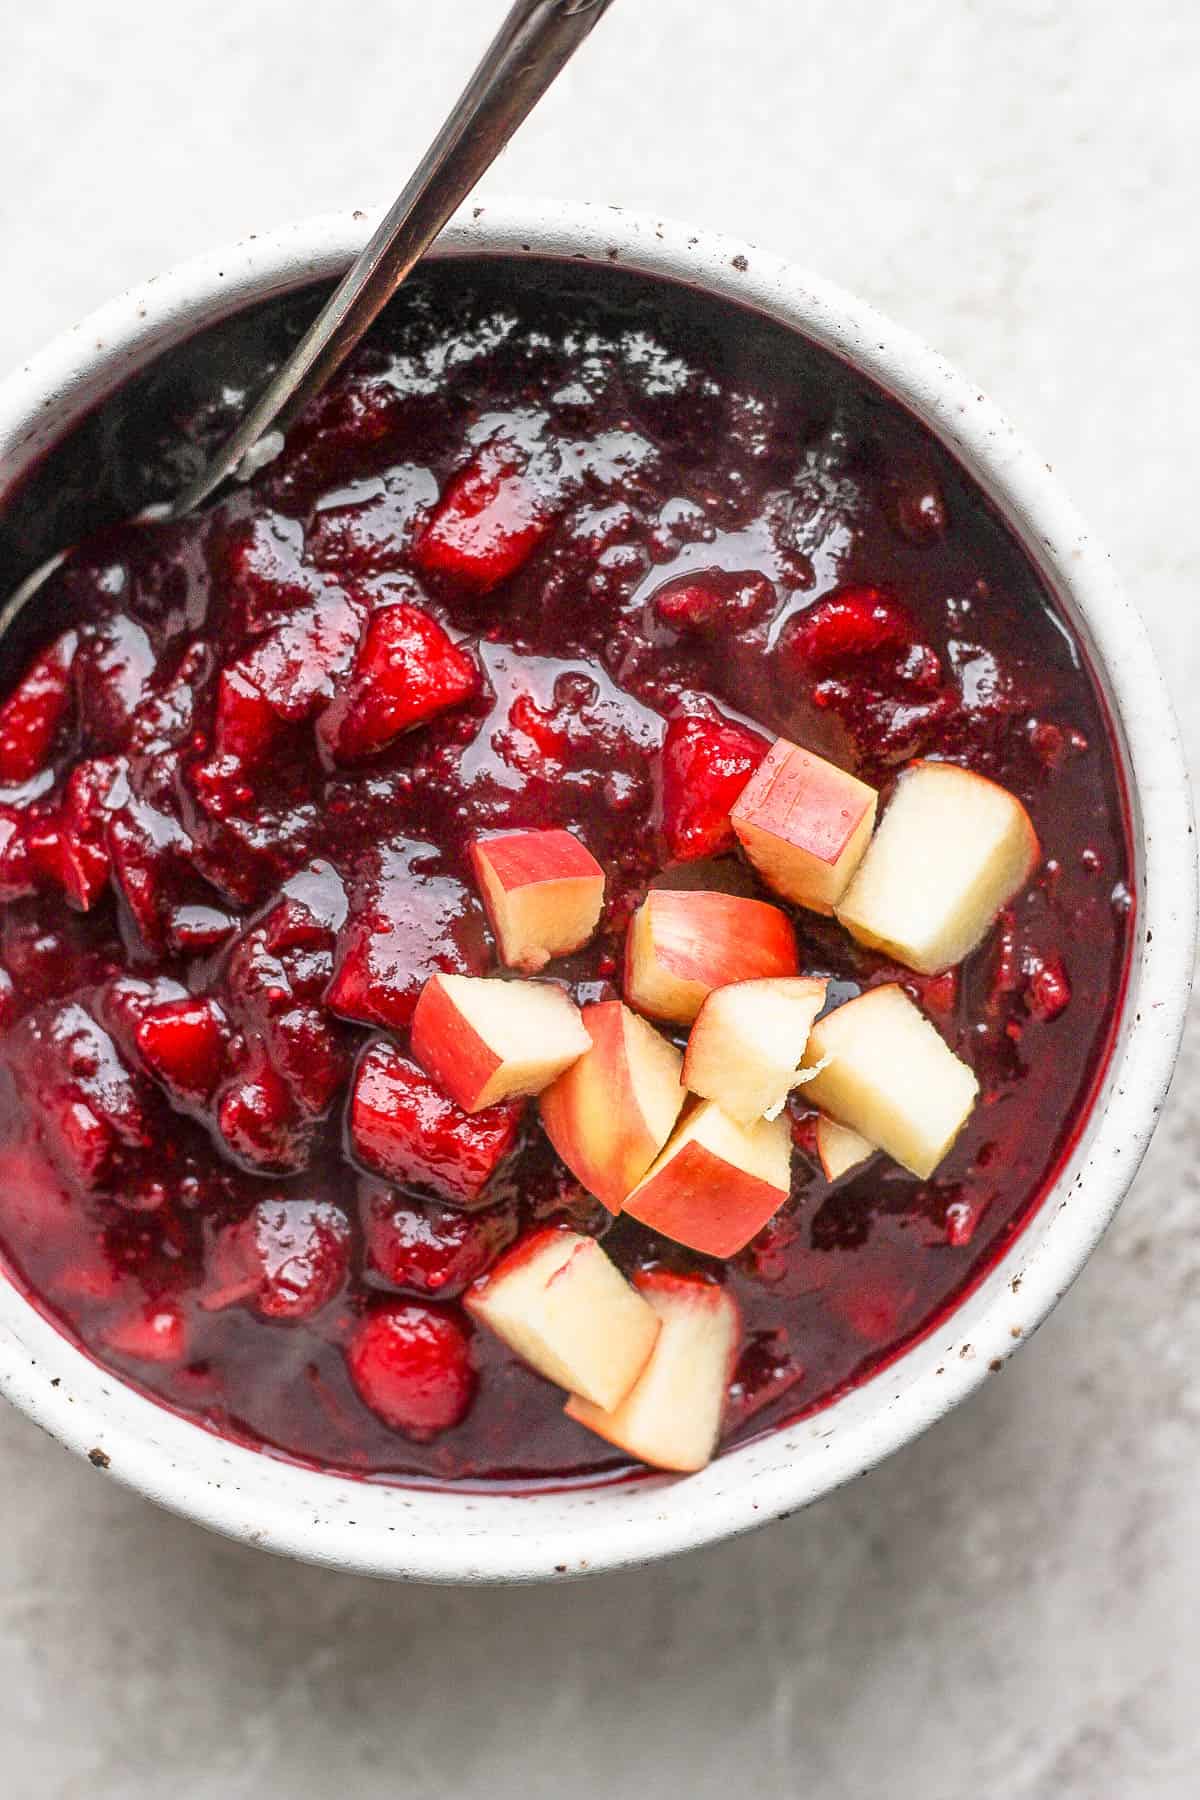 Apple cranberry sauce in a bowl.